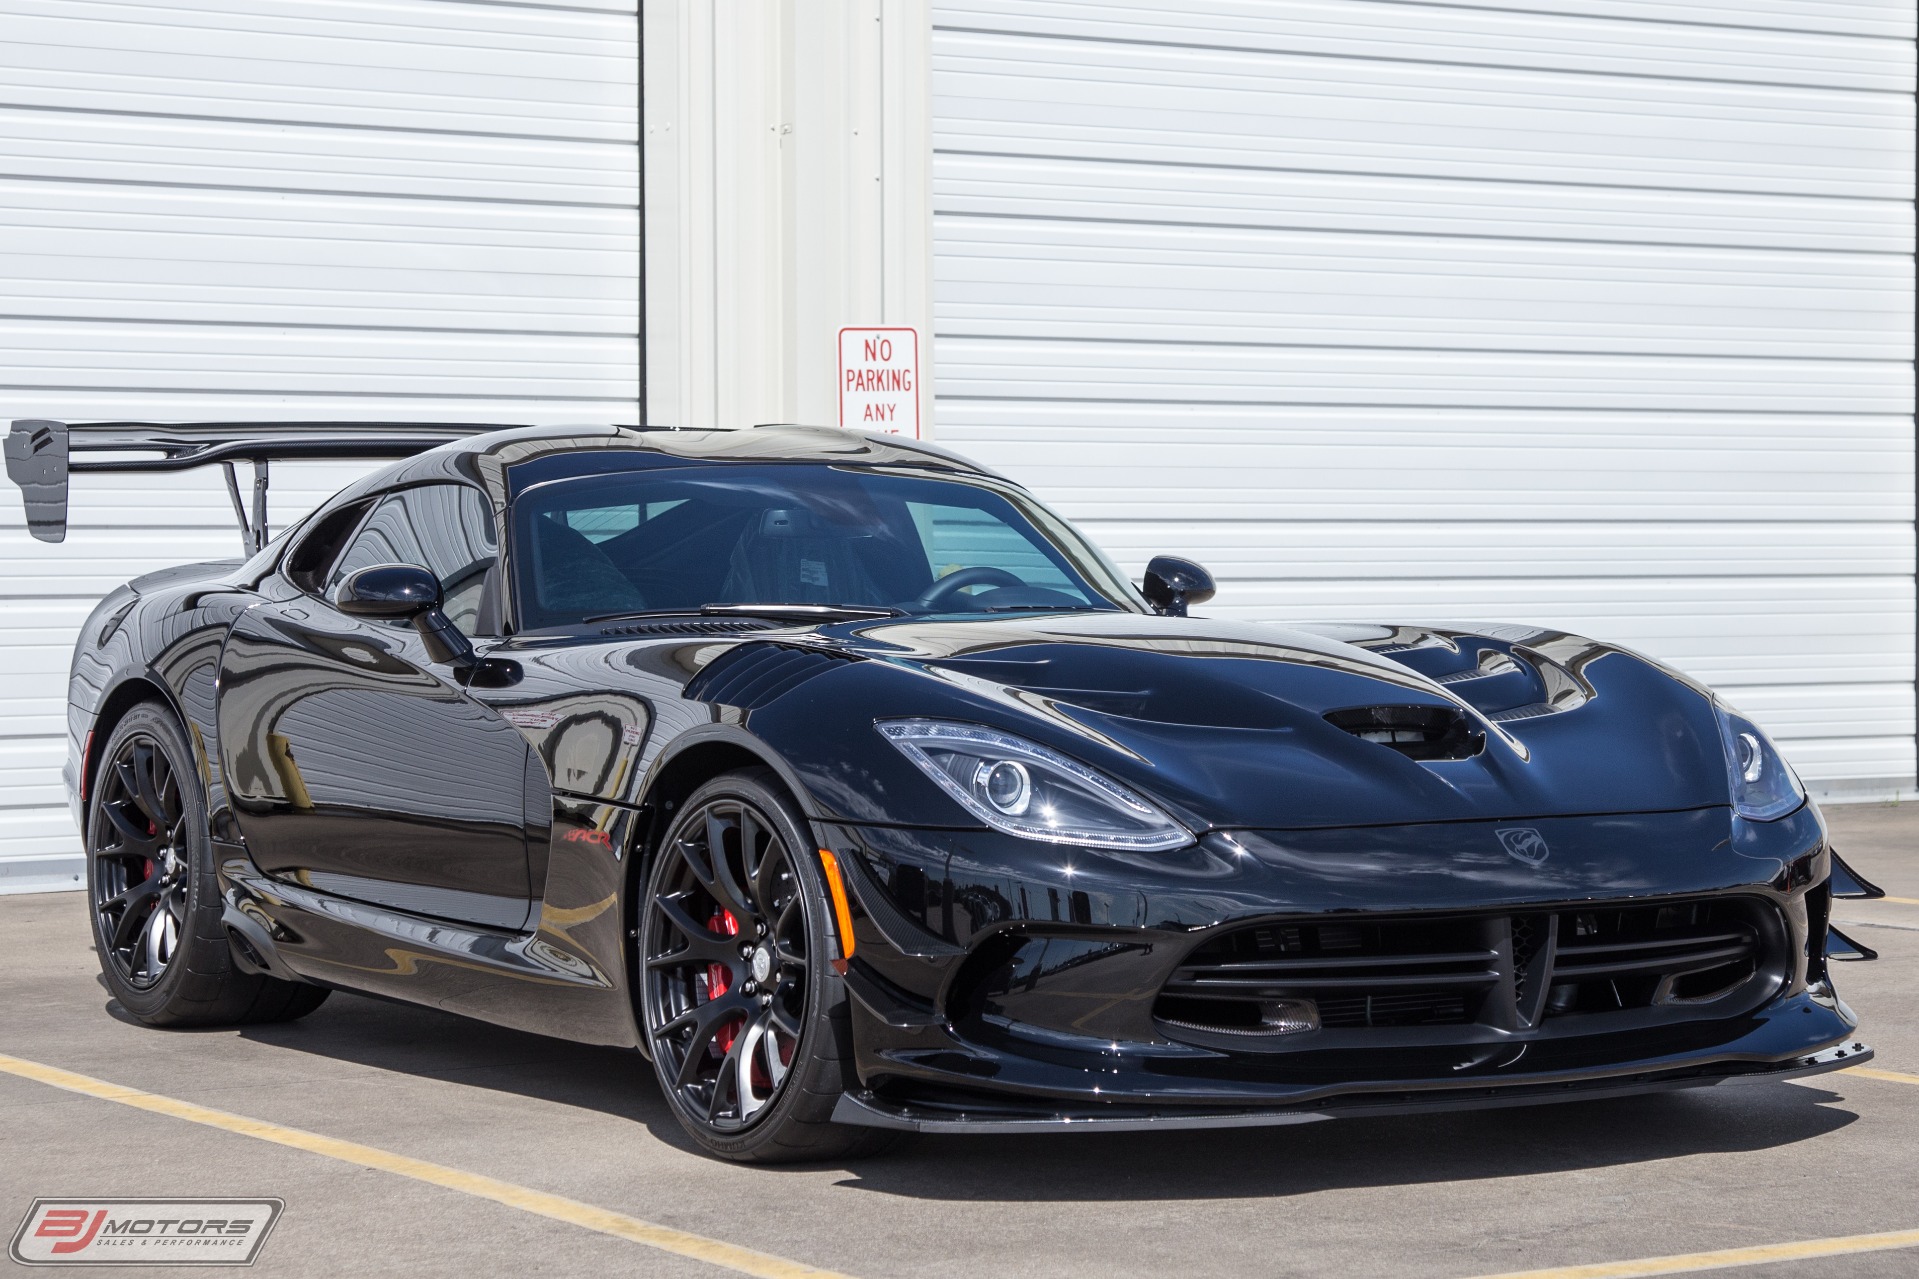 Used 17 Dodge Viper Acr Extreme For Sale Special Pricing Bj Motors Stock Hv